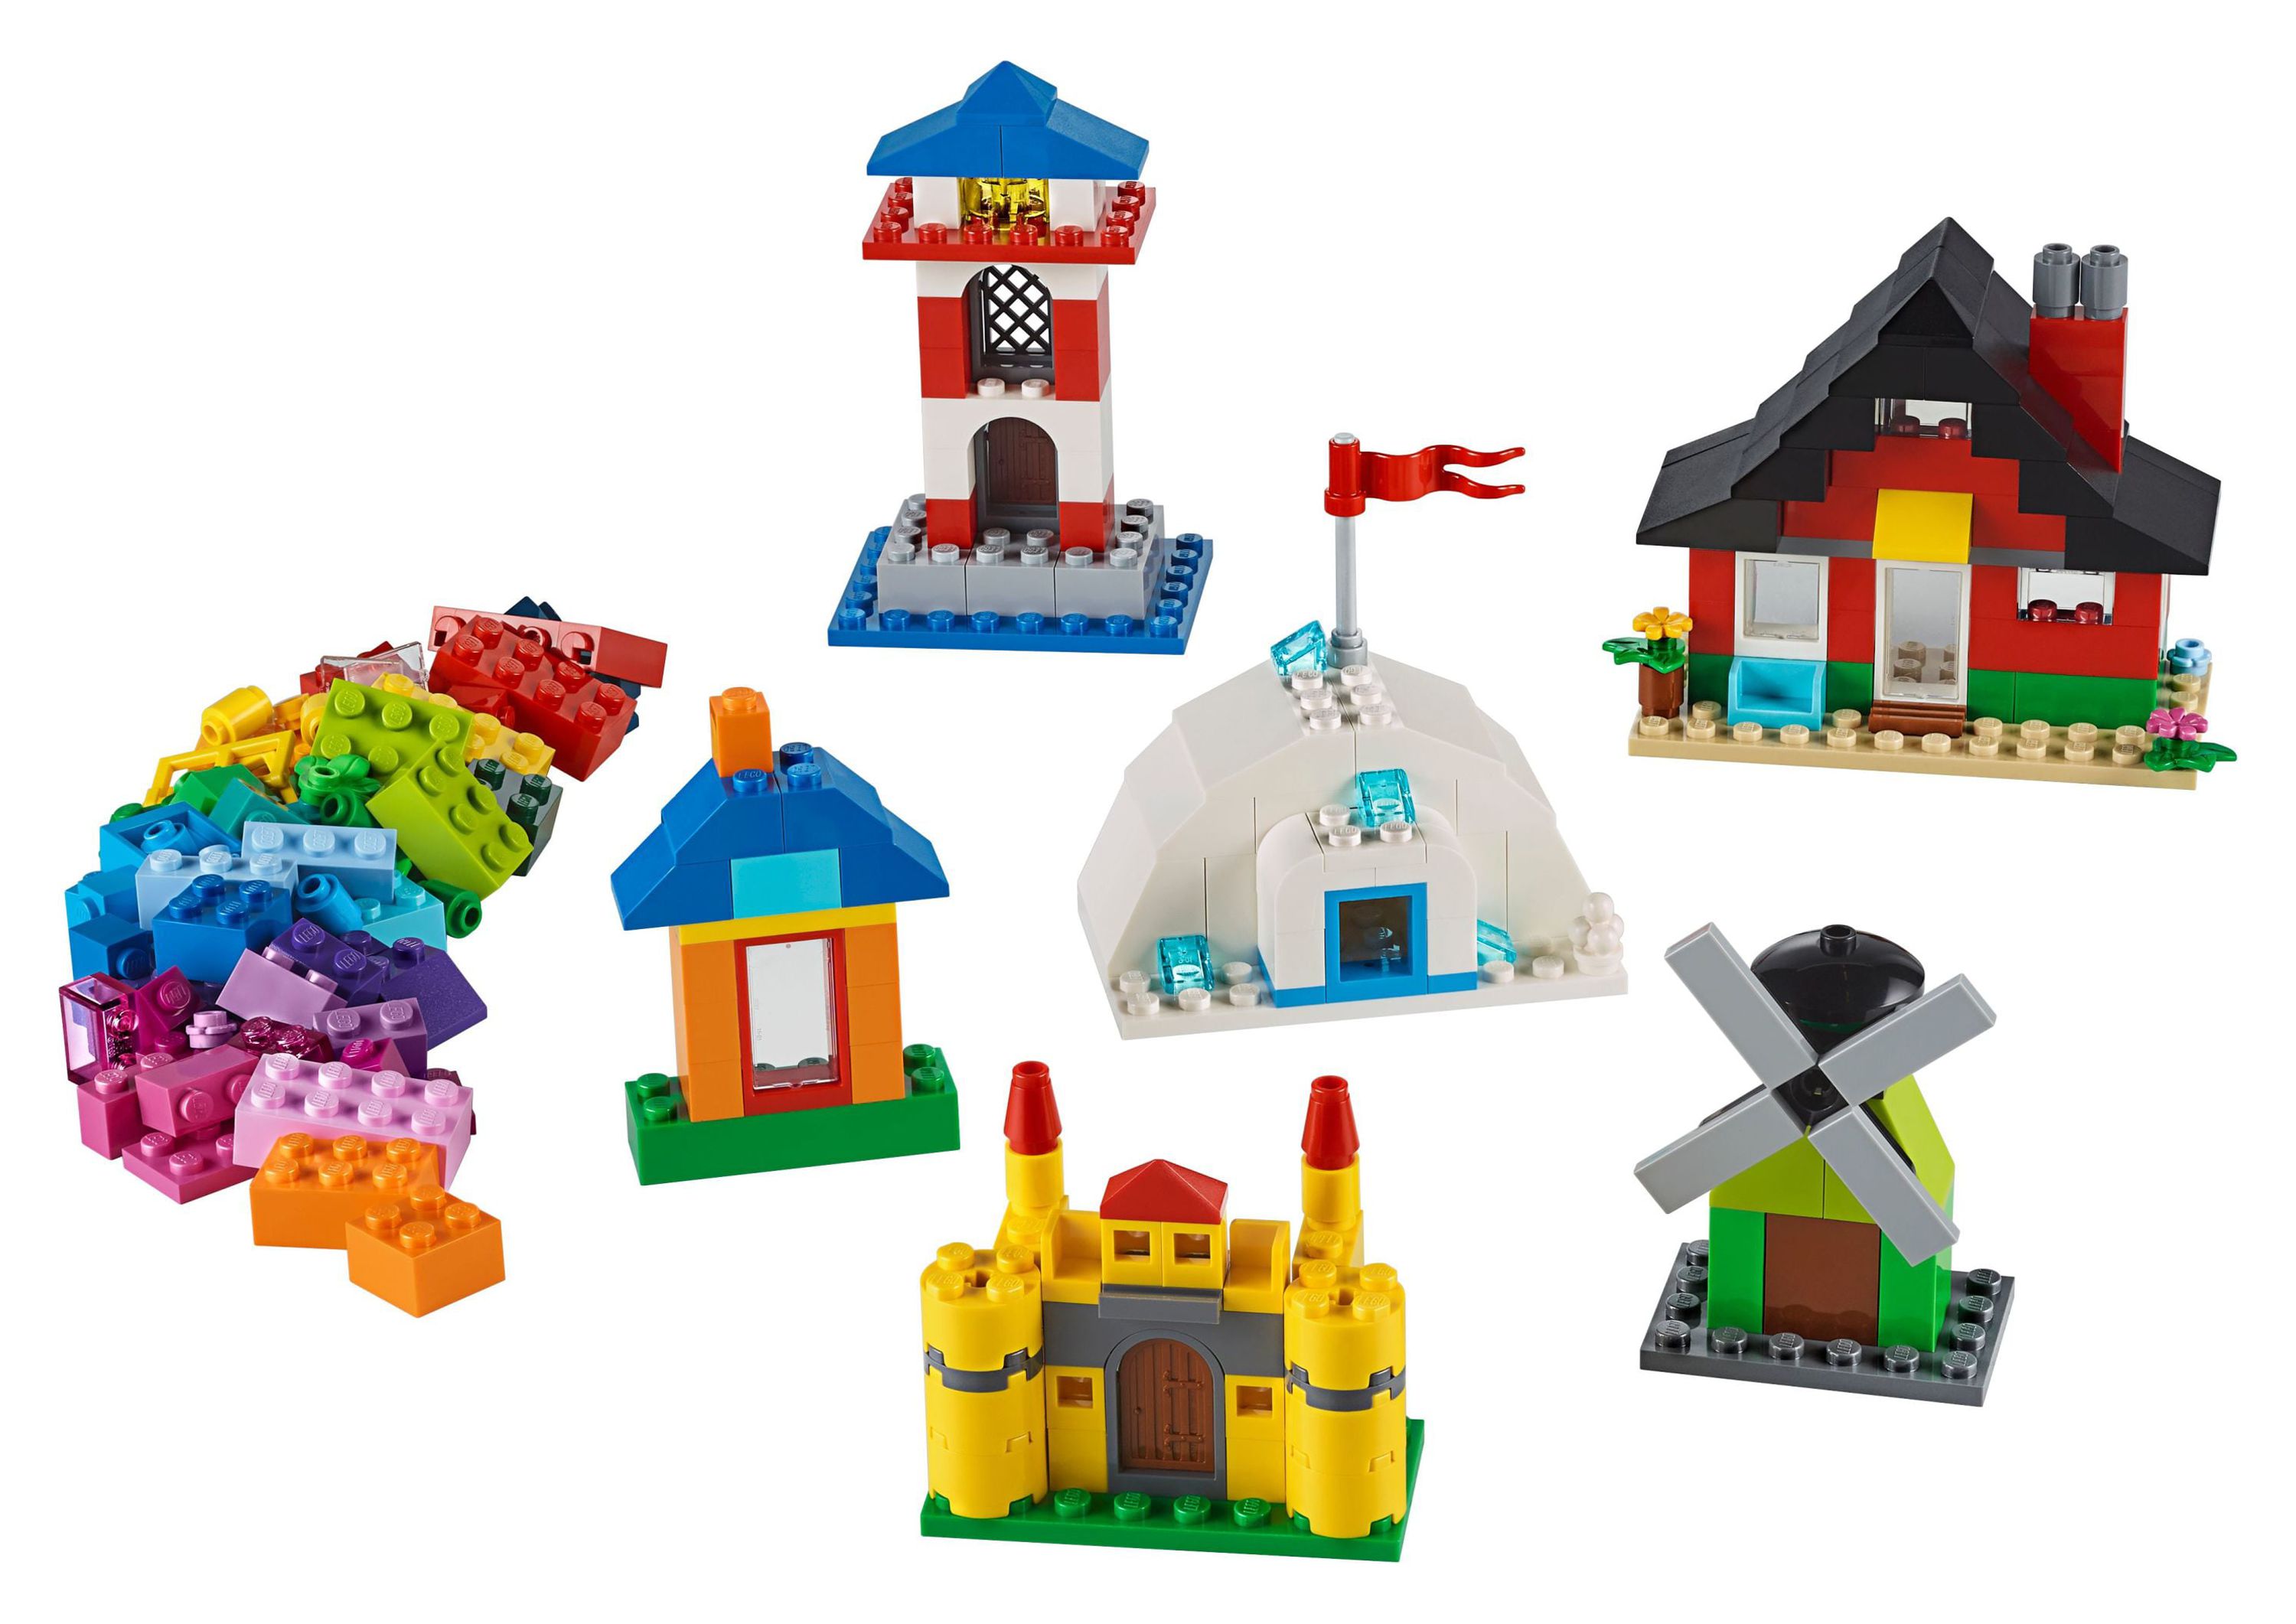 LEGO Classic Bricks and Houses 11008 Building Set for Imaginative Play (270 Pieces) - image 3 of 7